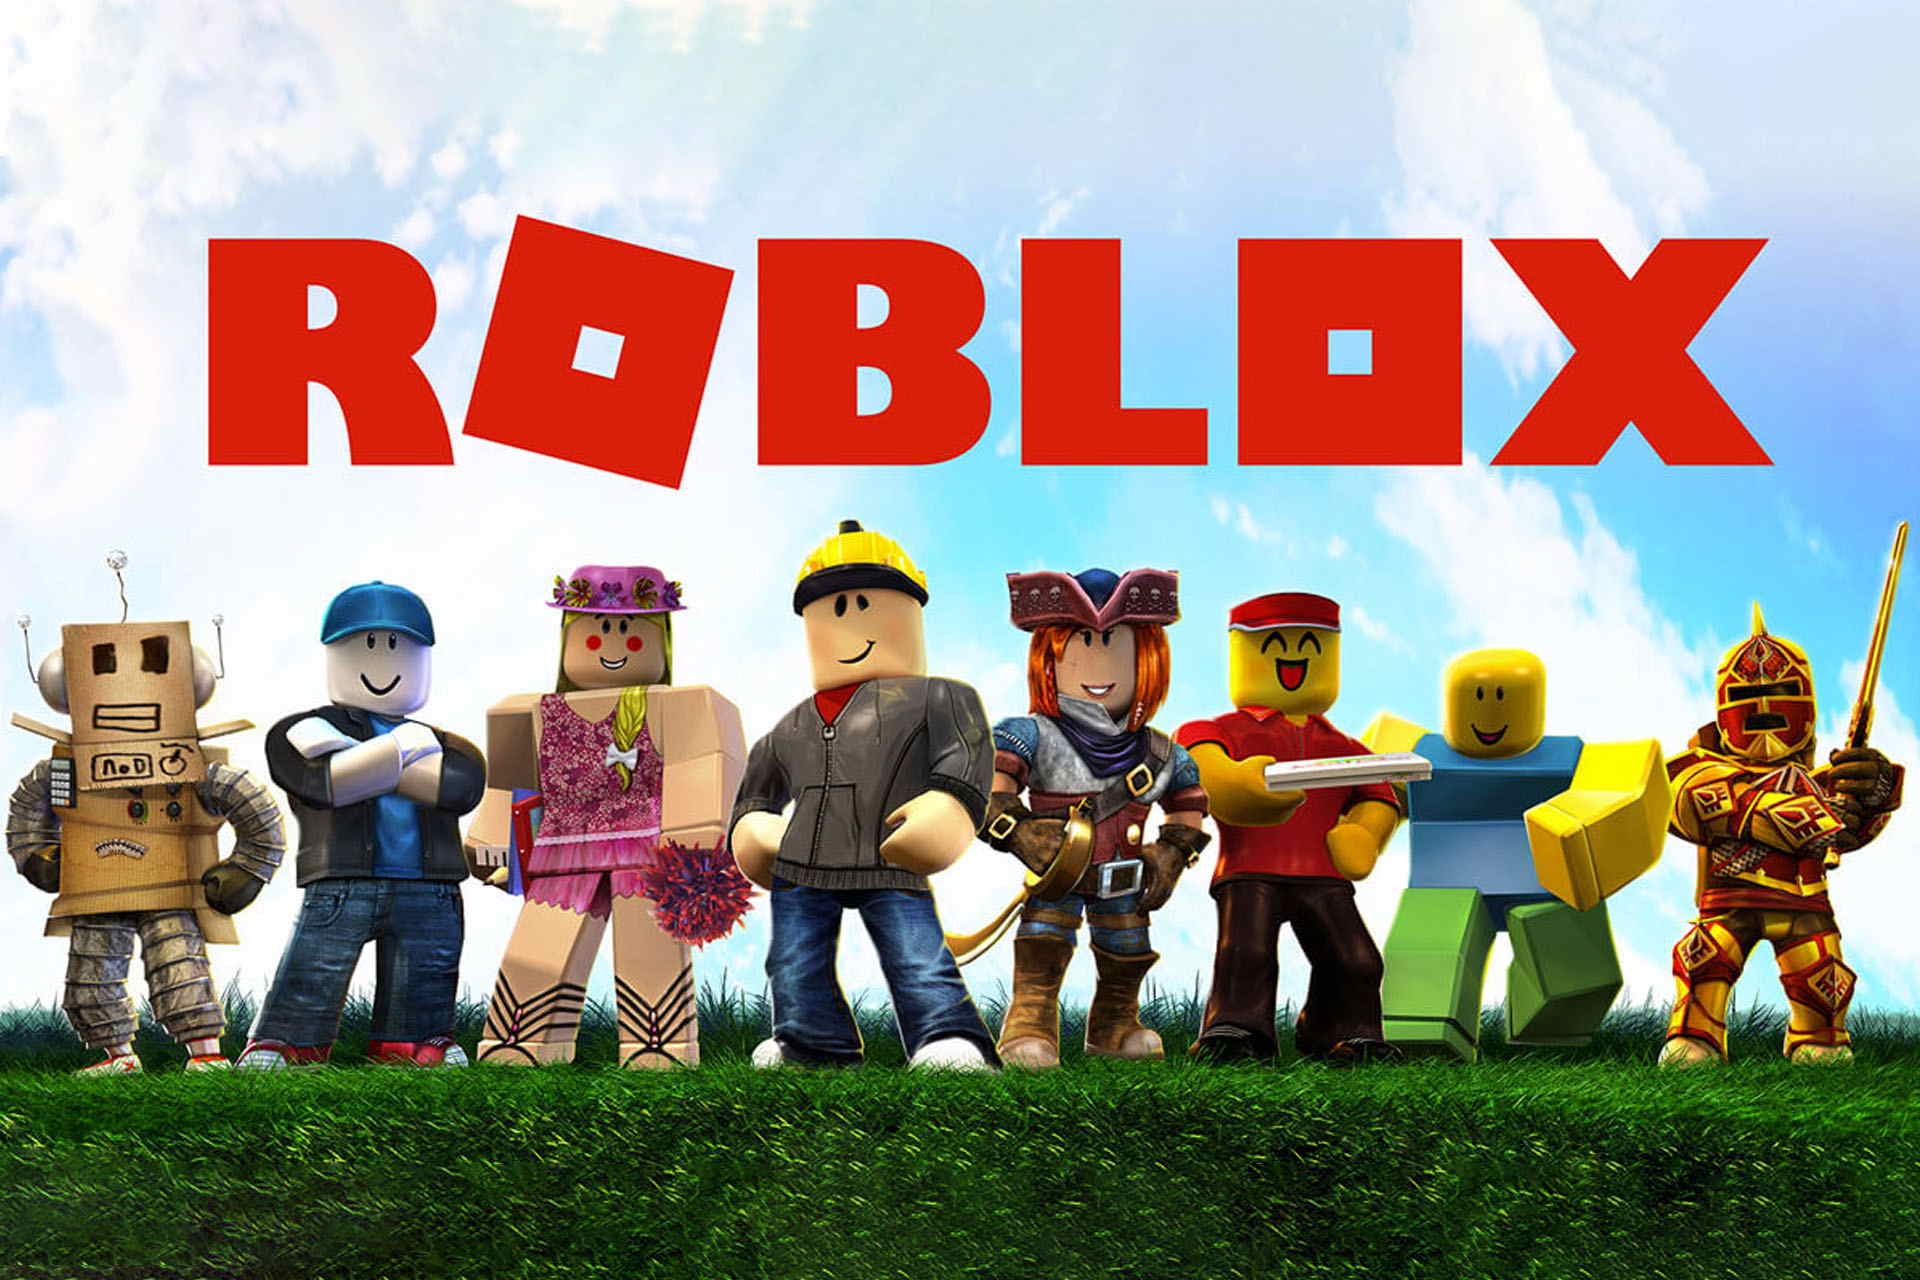 5 Alternative Games Like Roblox To Play Online - computer game similar to roblox